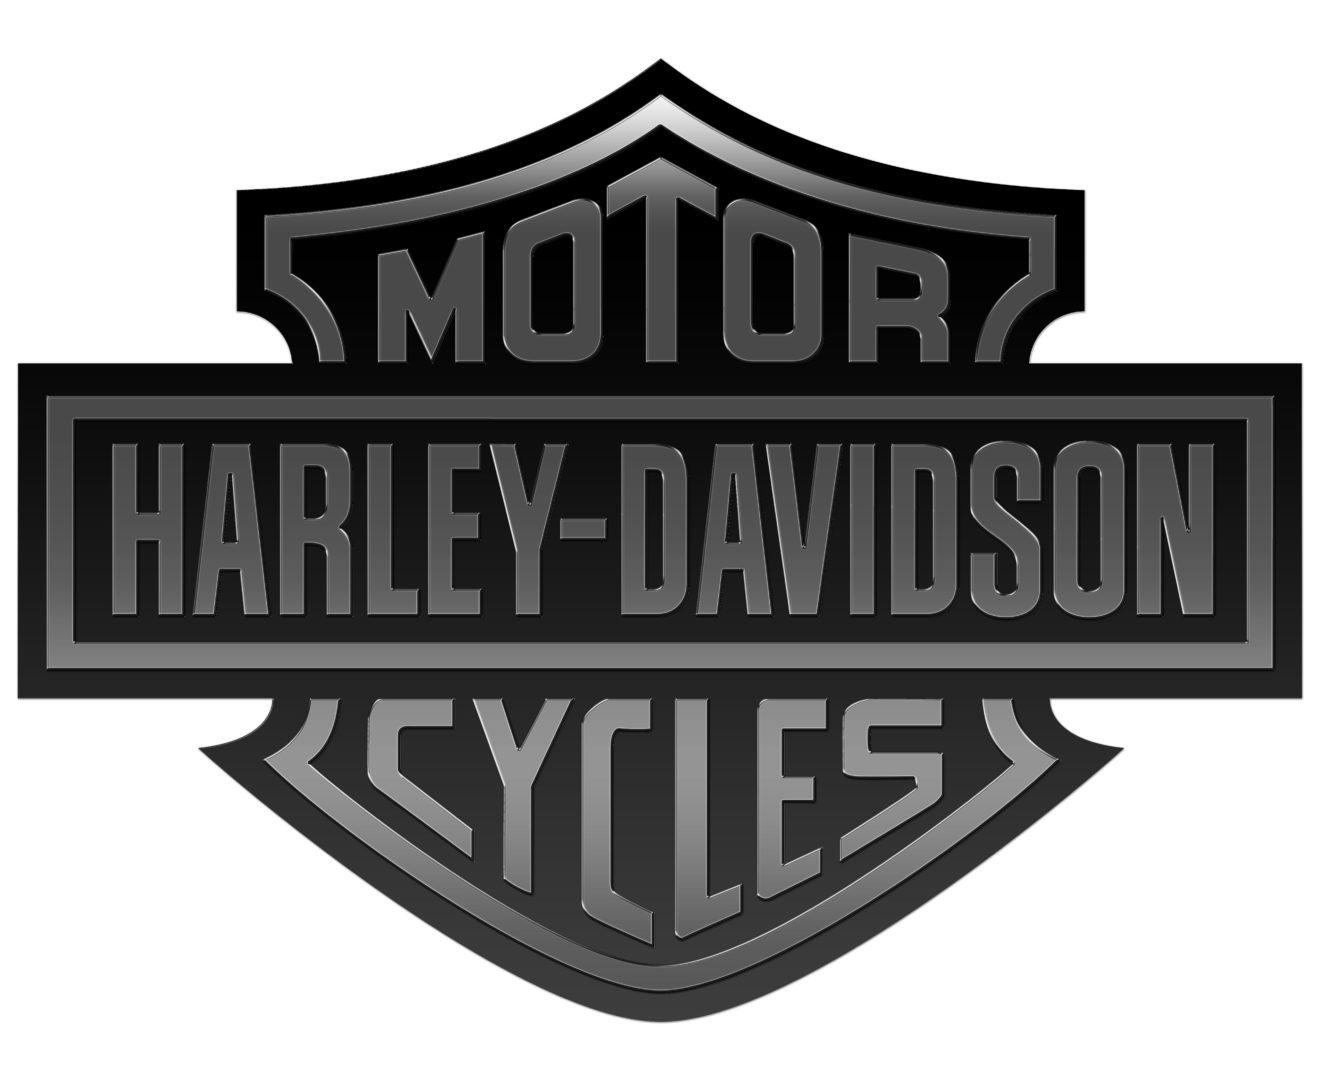  Harley  Davidson  motorcycle logo  history and Meaning bike 